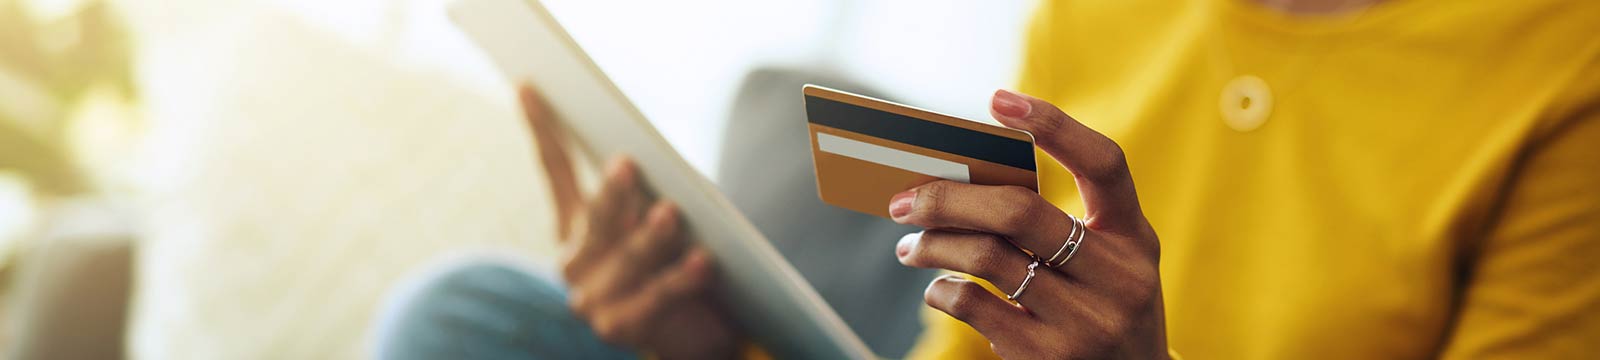 a person making a online purchase with a debit/credit card